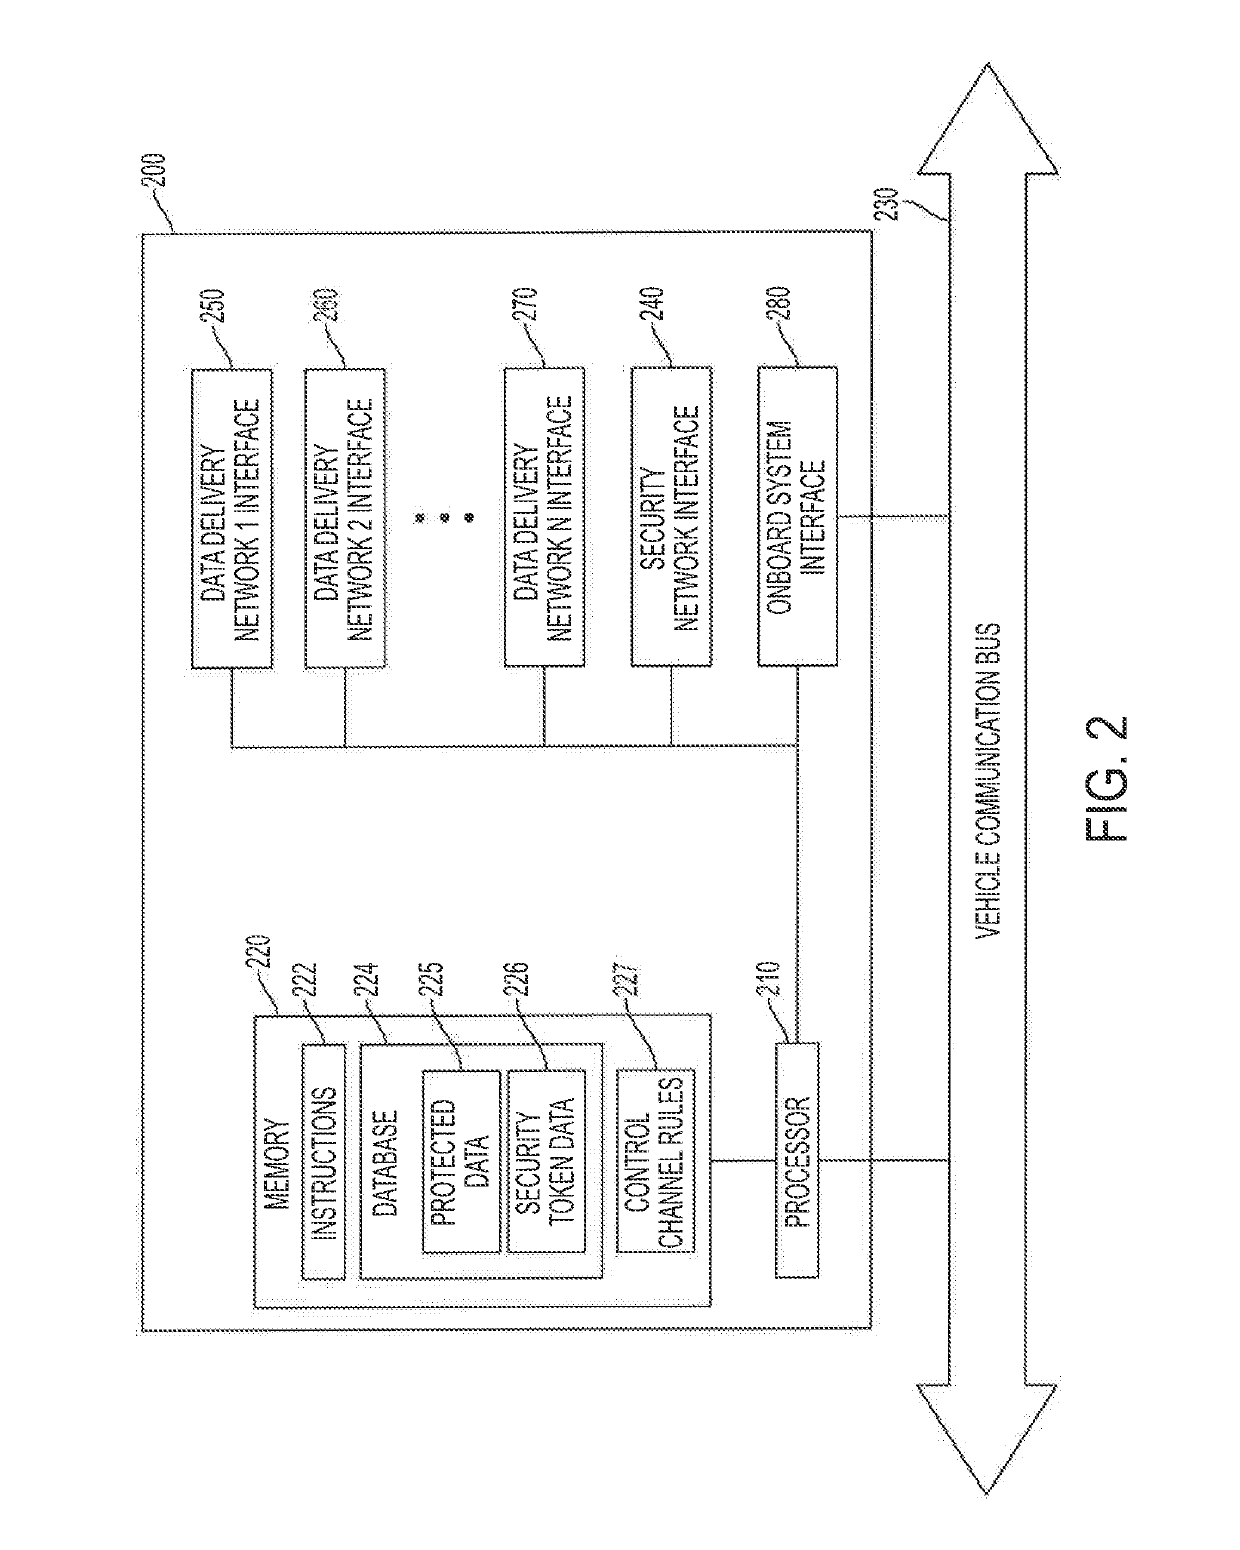 Systems and methods for reliably providing a control channel for communicating control information with automotive electronic control units